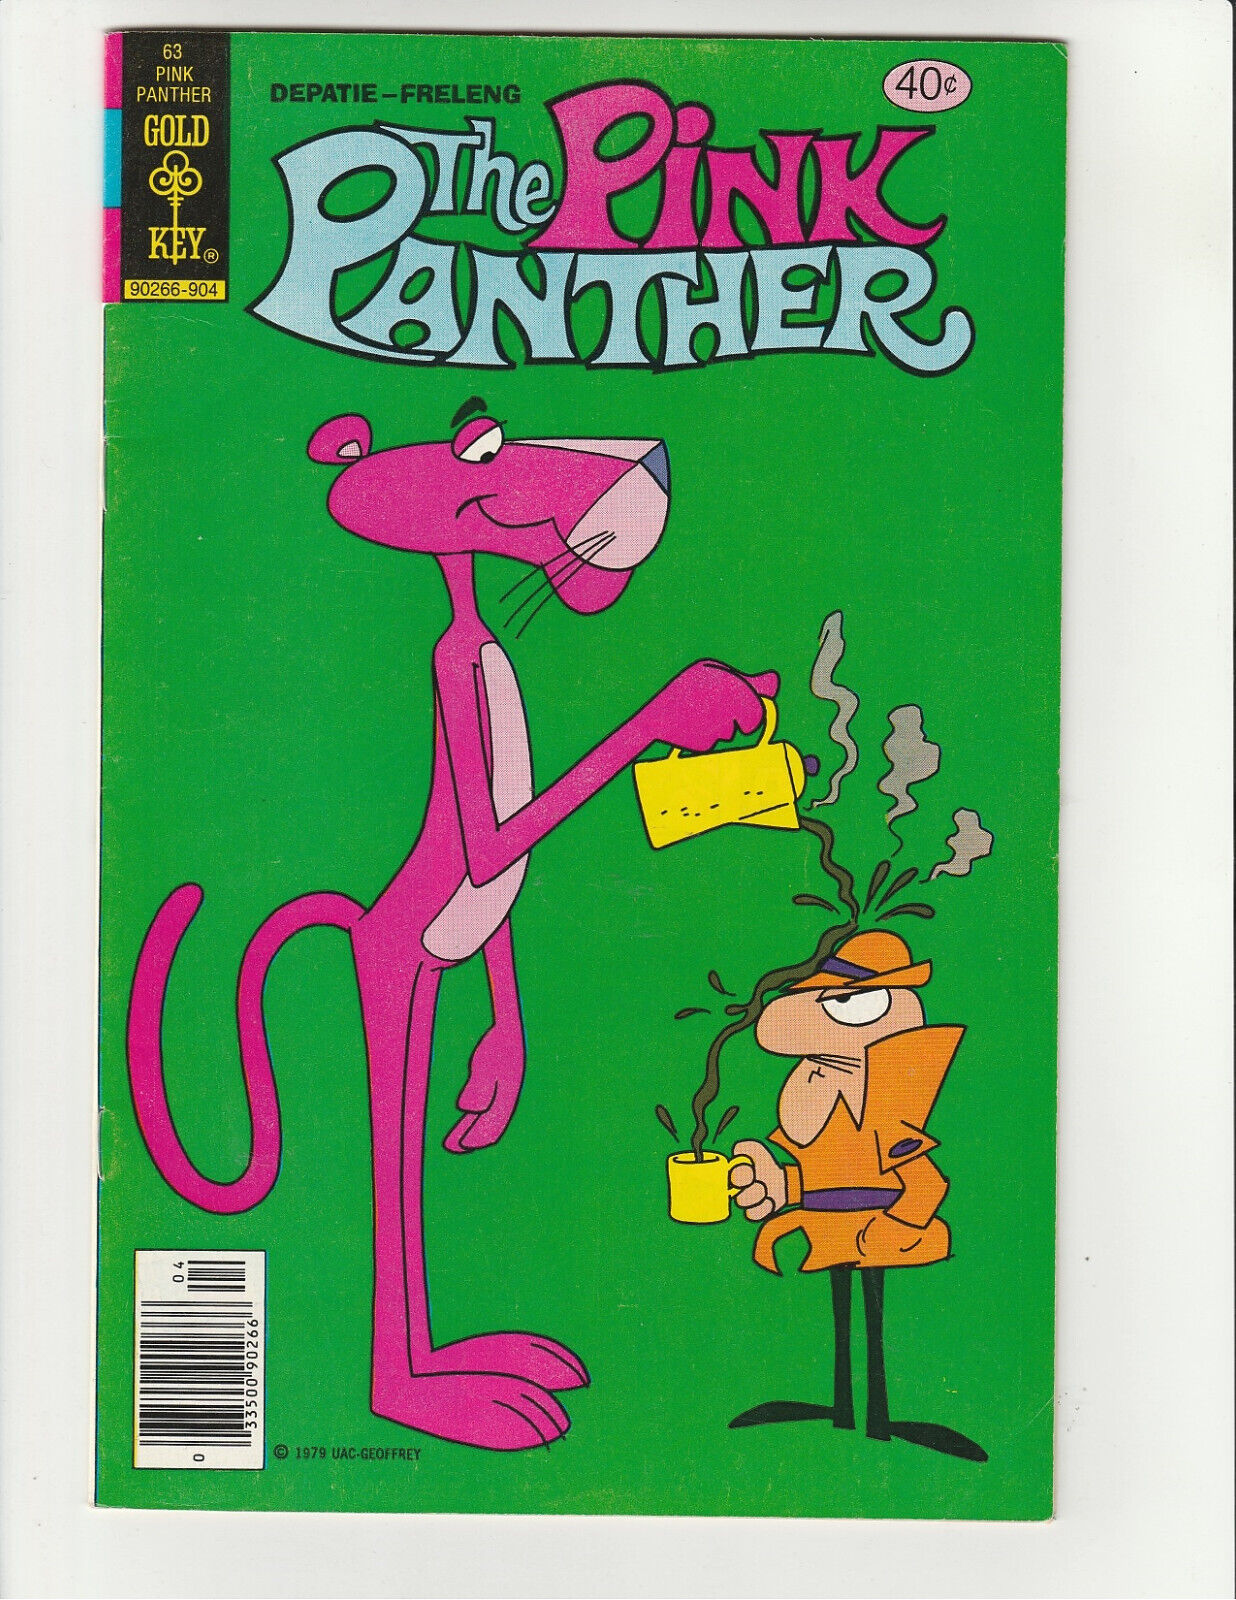 The Pink Panther # 63 1979 Gold Key Comics (7.0) Fine/Very Fine (F/VF)